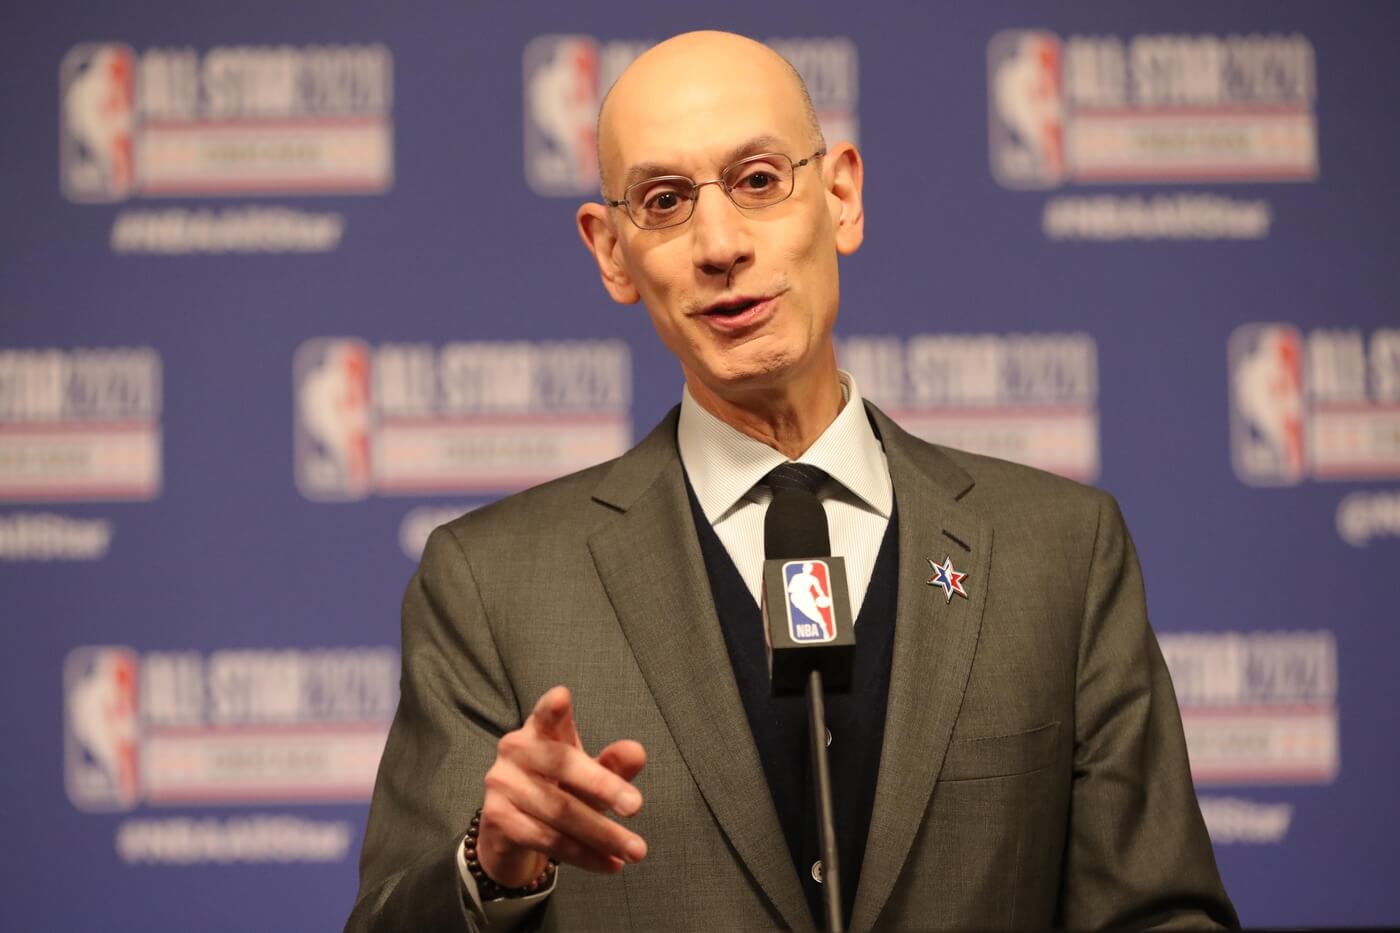 Feb 15, 2020; Chicago, Illinois, USA; NBA commissioner Adam Silver speaks at a press conference during NBA All Star Saturday Night at United Center. Mandatory Credit: Dennis Wierzbicki-USA TODAY Sports